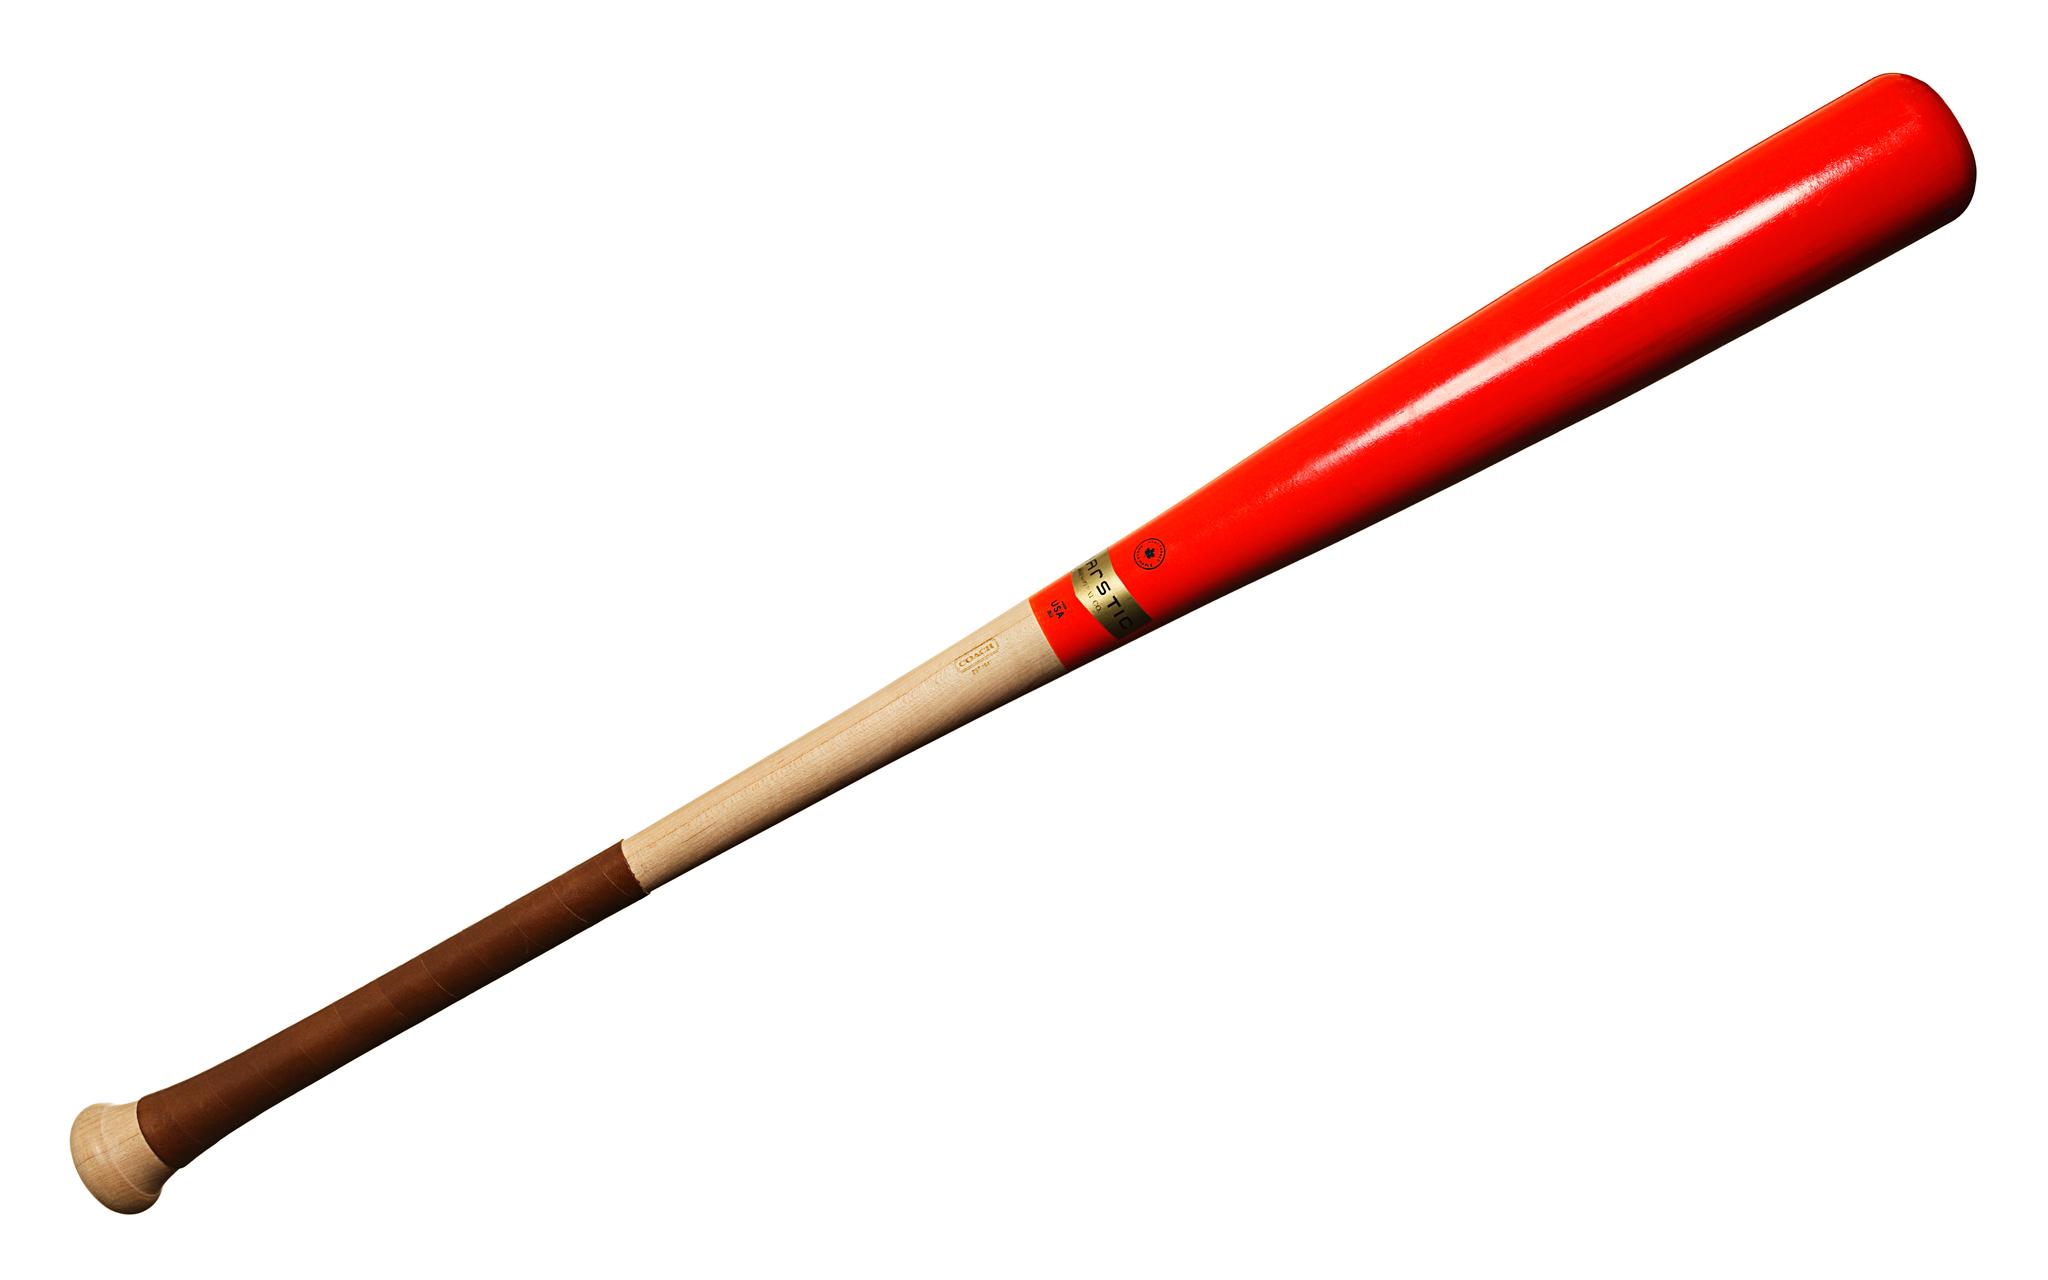 Picture Of A Baseball Bat. Free download best Picture Of A